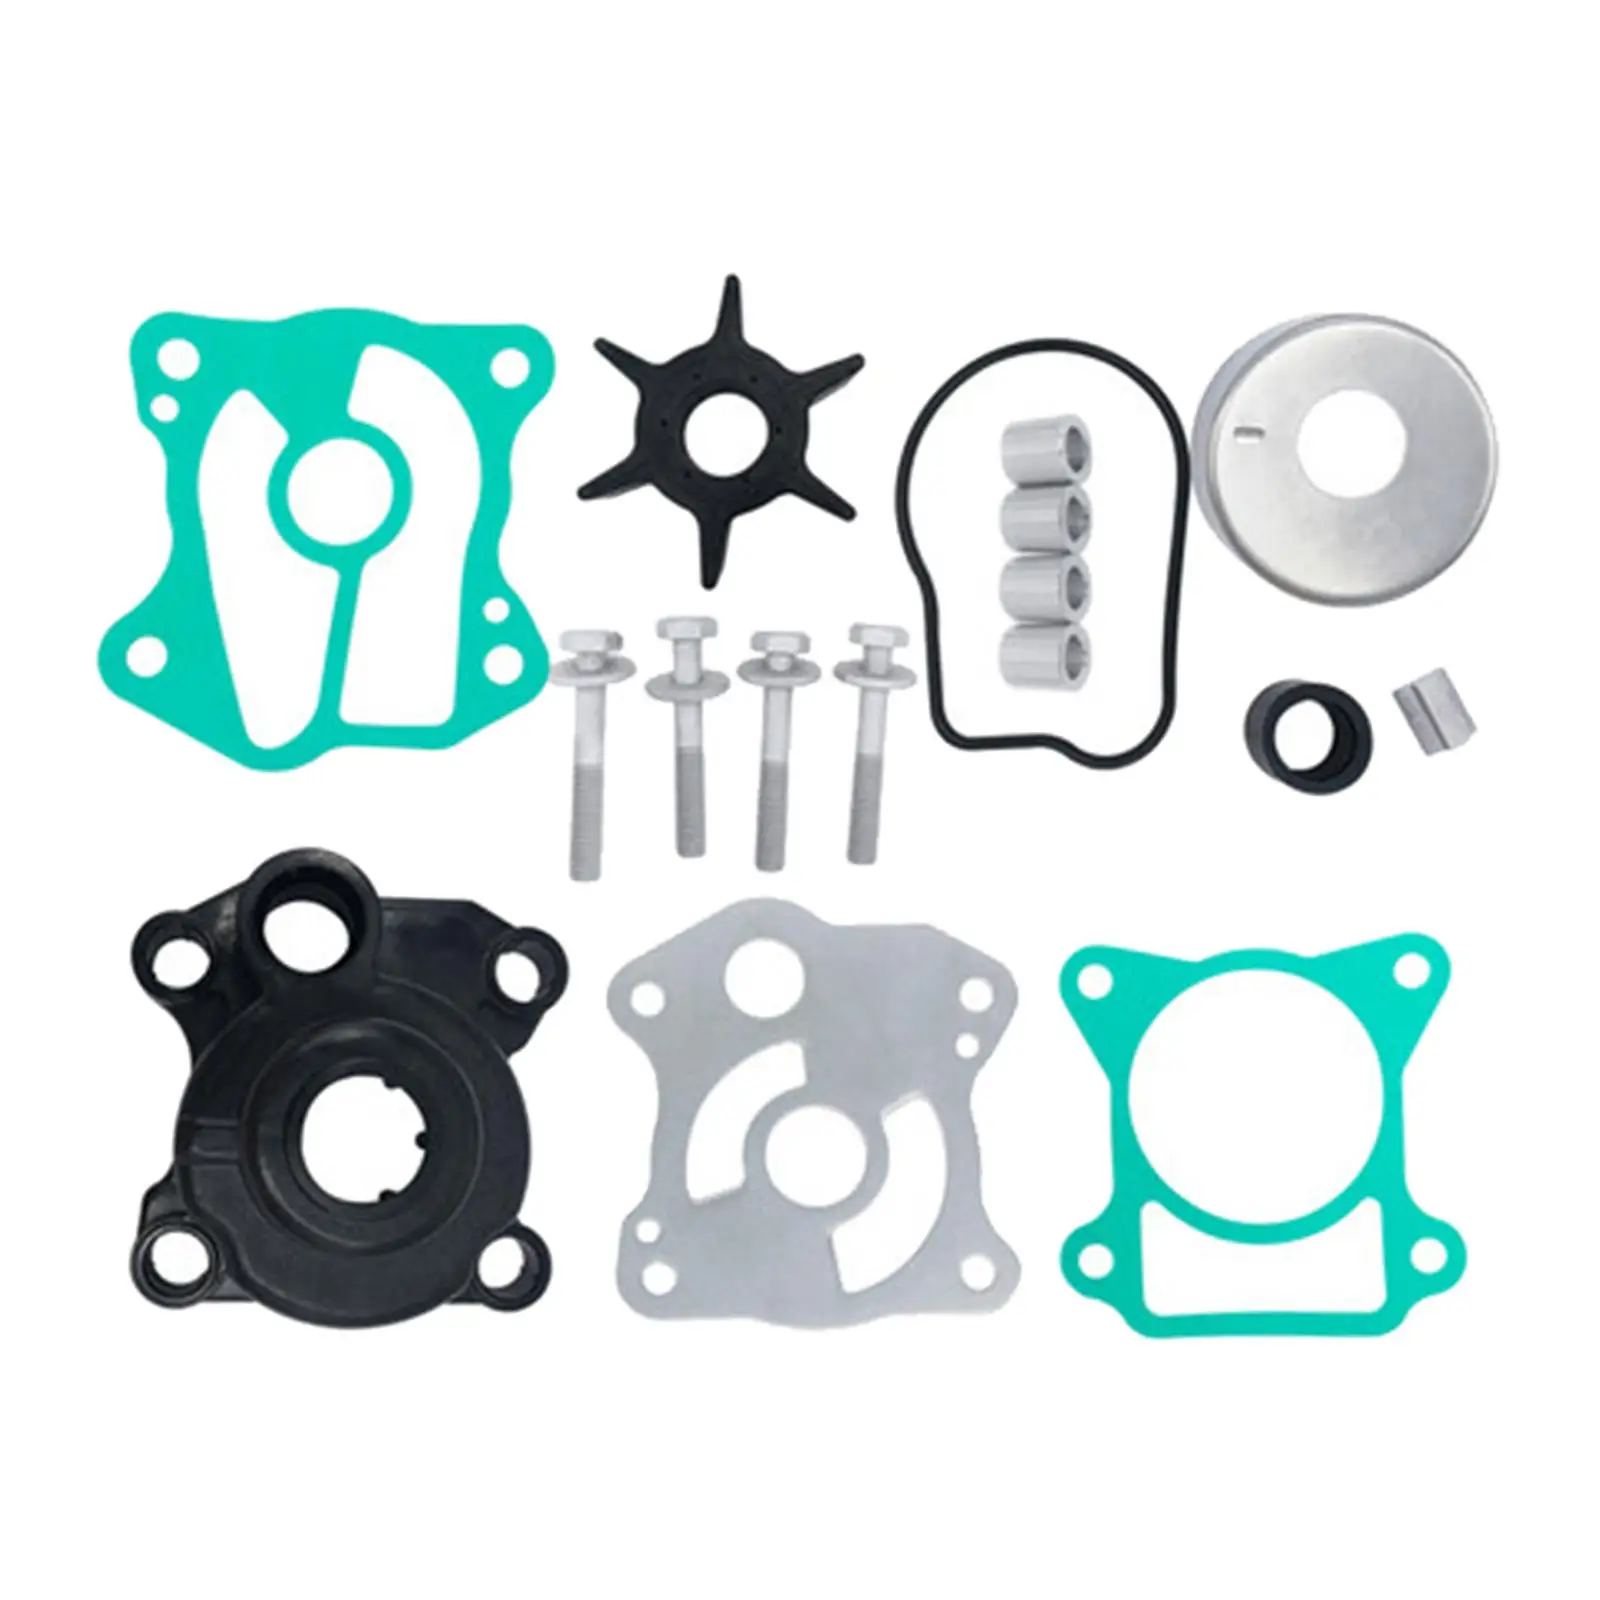 Water Pump Impeller Repair Kit for Honda BF40A BF40D BF50A BF50D 06193-ZV5-020 06193-ZV5-000 Outboard Engines Replace